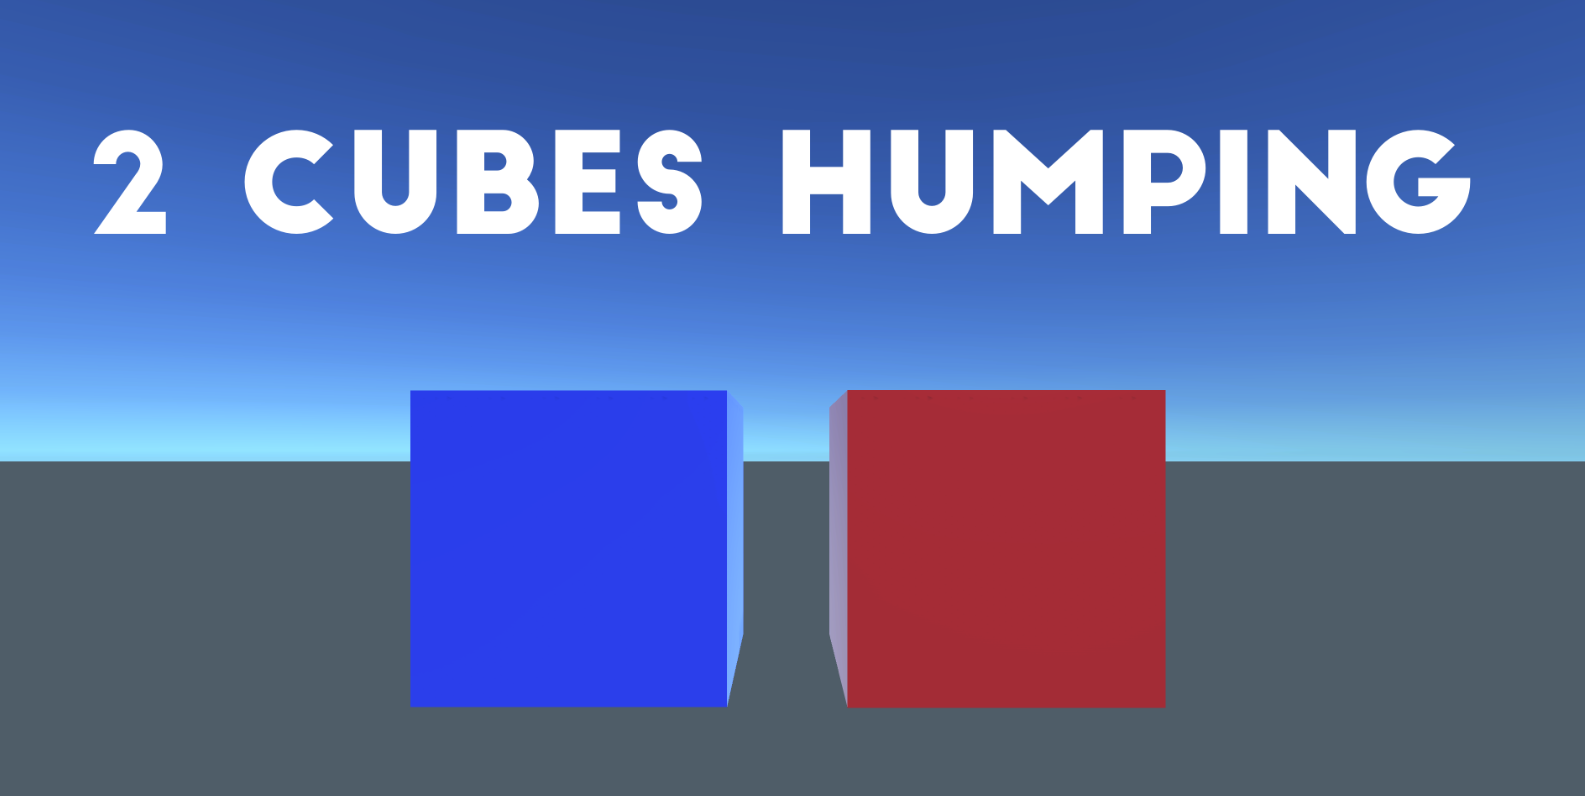 2 Cubes Humping